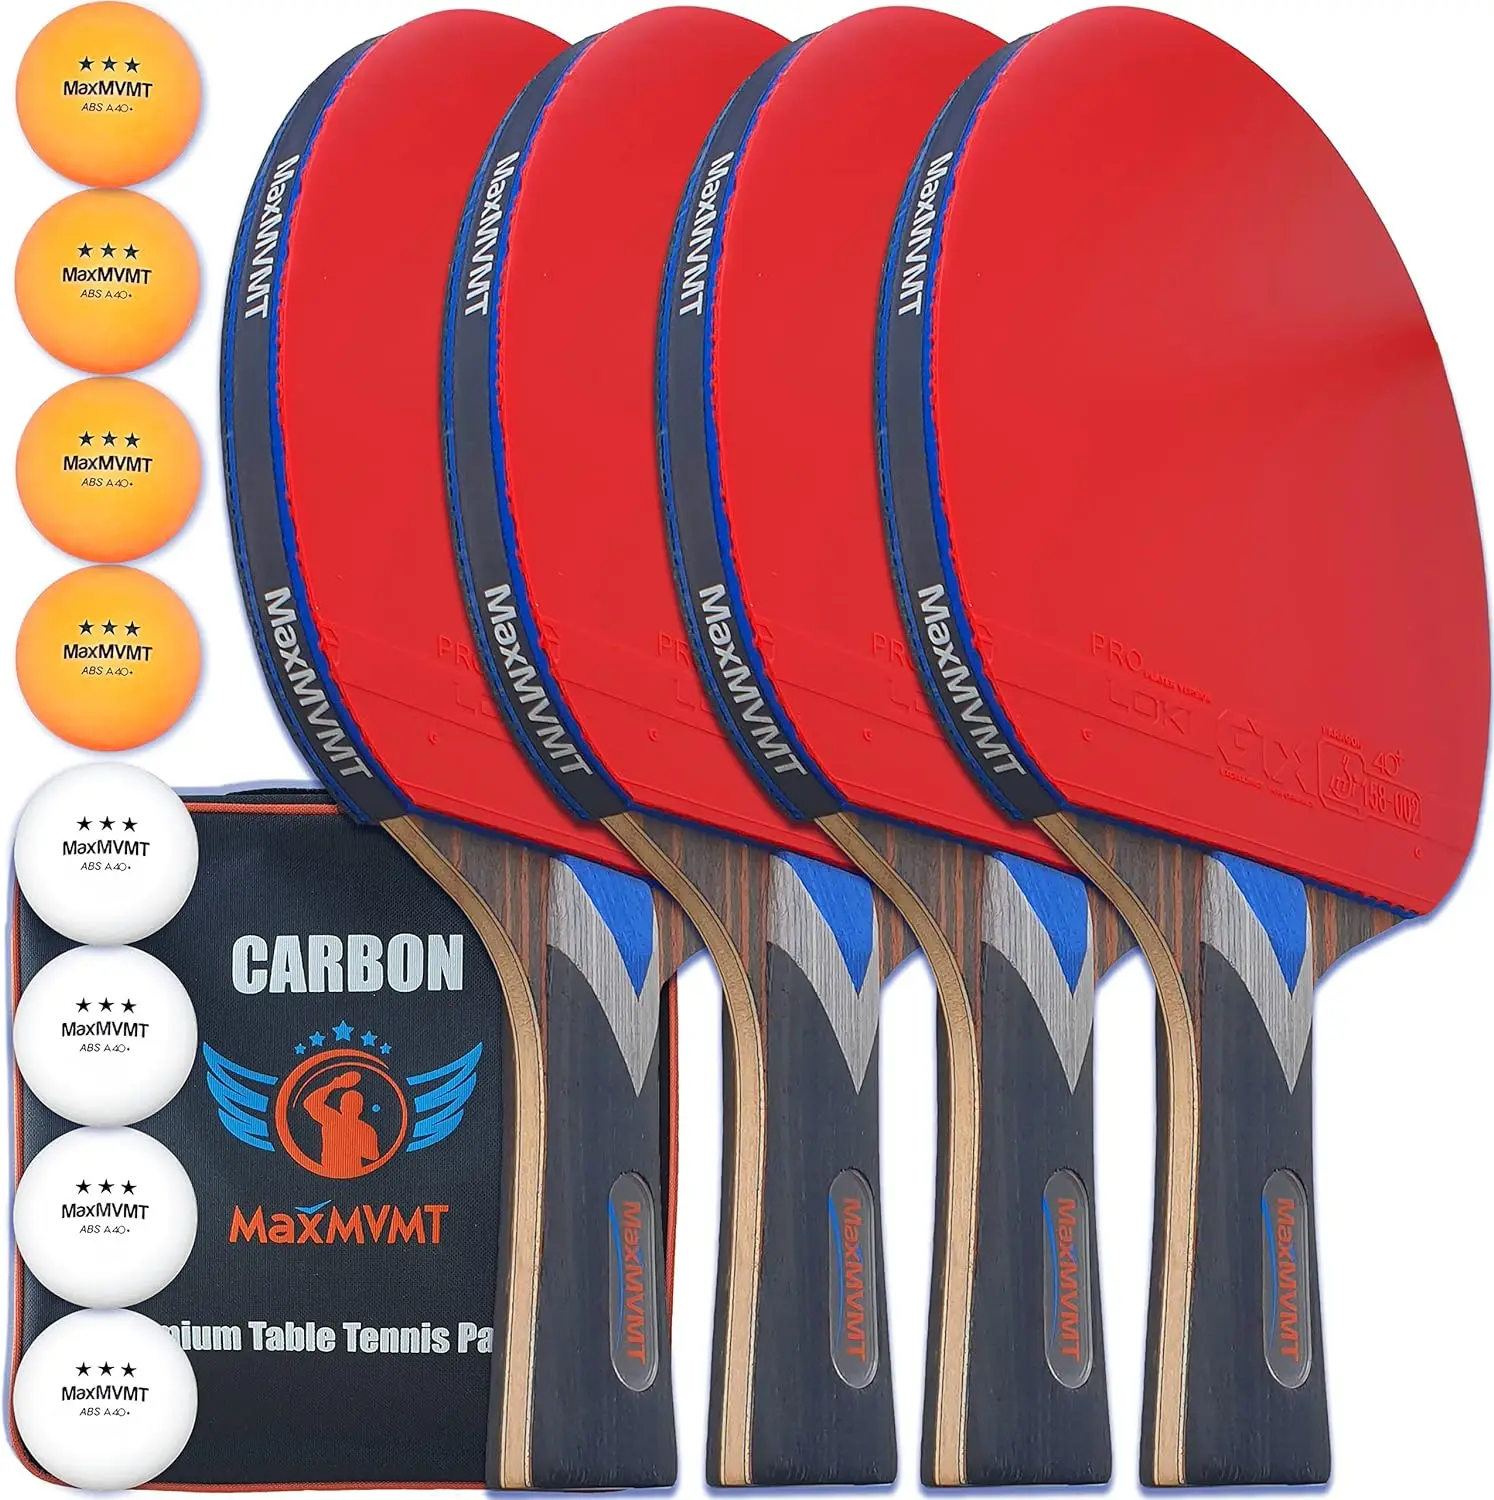 

Ping Pong Paddle Set of 4 - Carbon Fiber 7 Ply Rackets - 2 Wristbands - 8 Balls - 1 Rubber Cleaner Sponge - Premium ITTF Approve